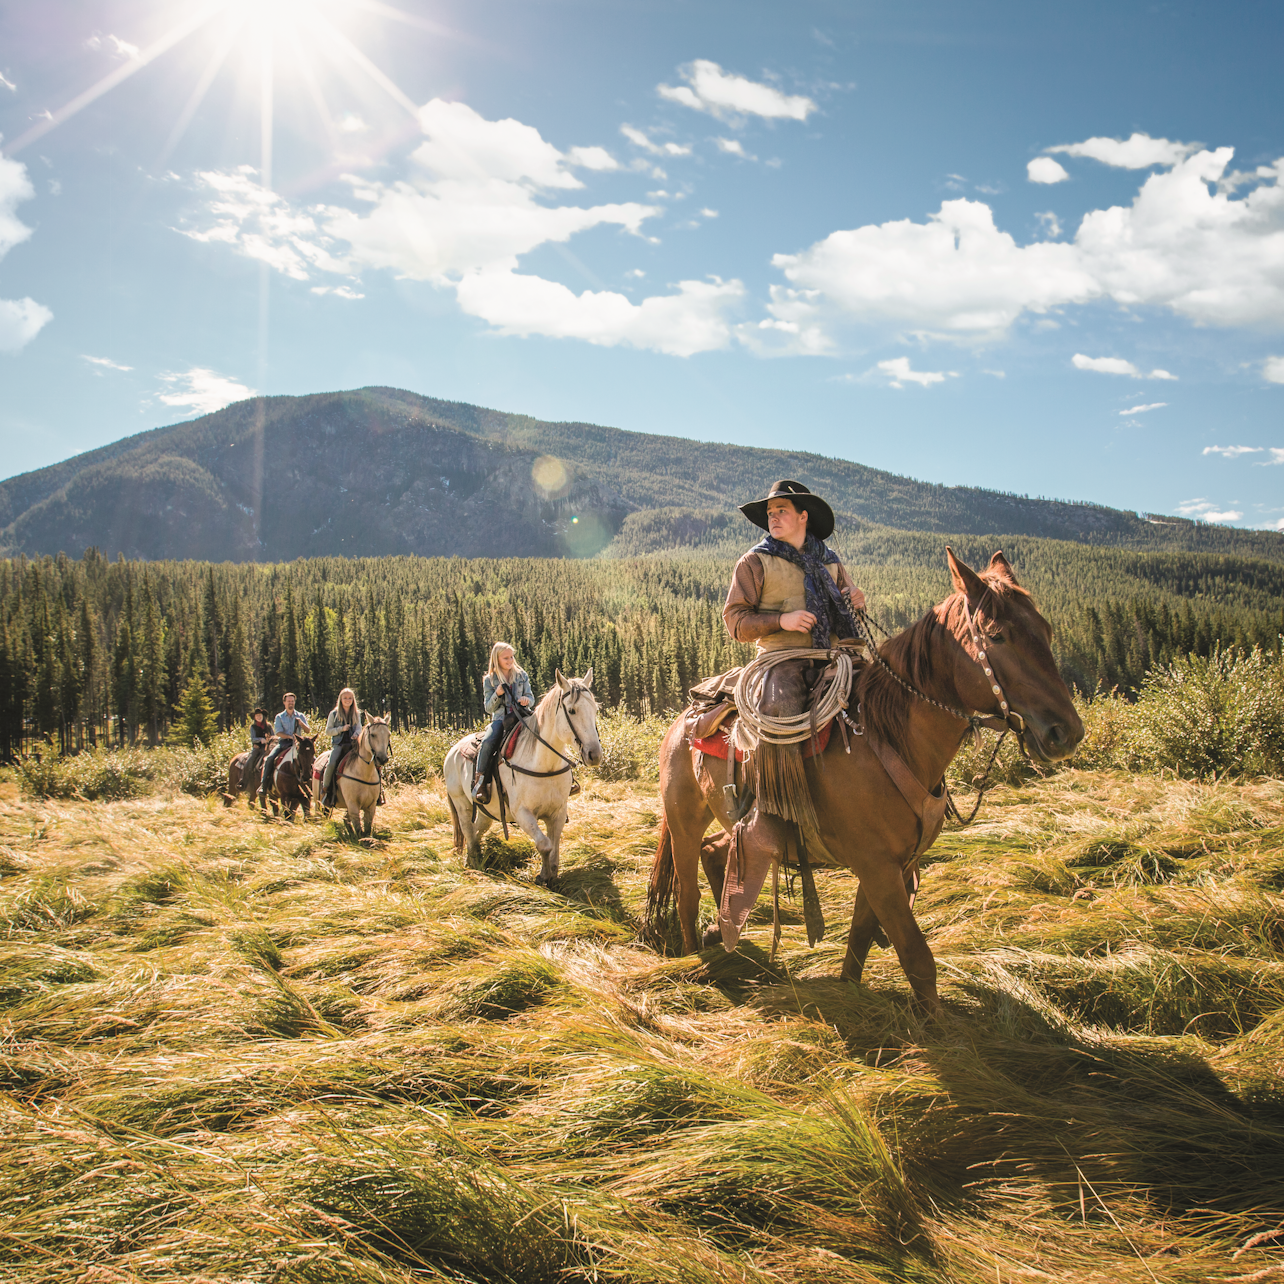 Cowboy Cookout: Wagon Ride from Banff - Accommodations in Banff